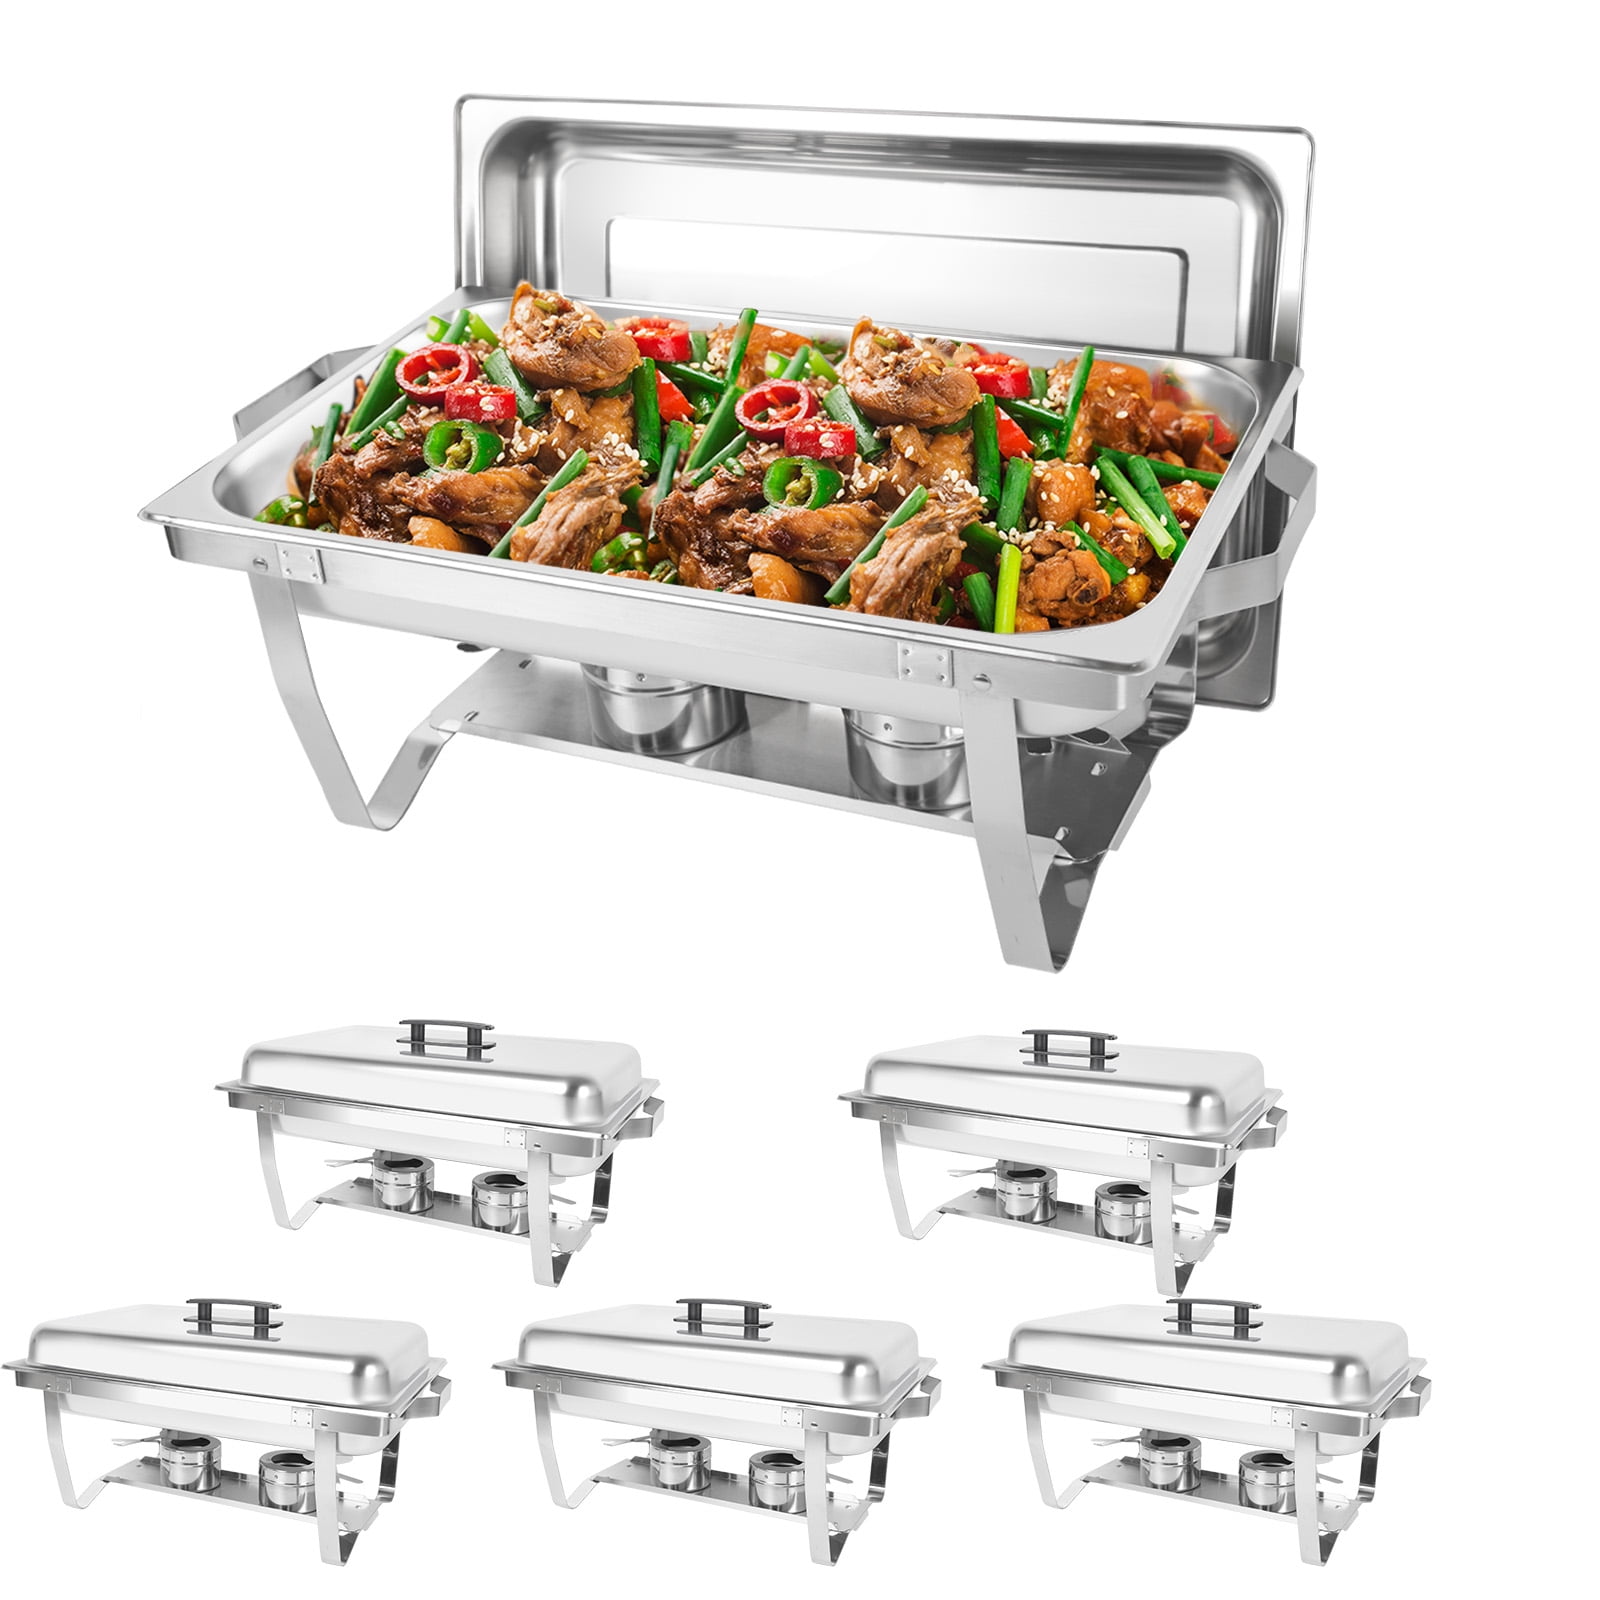 BENTISM Chafing Dish Buffet Set 6 Pack 8QT Stainless Steel Food